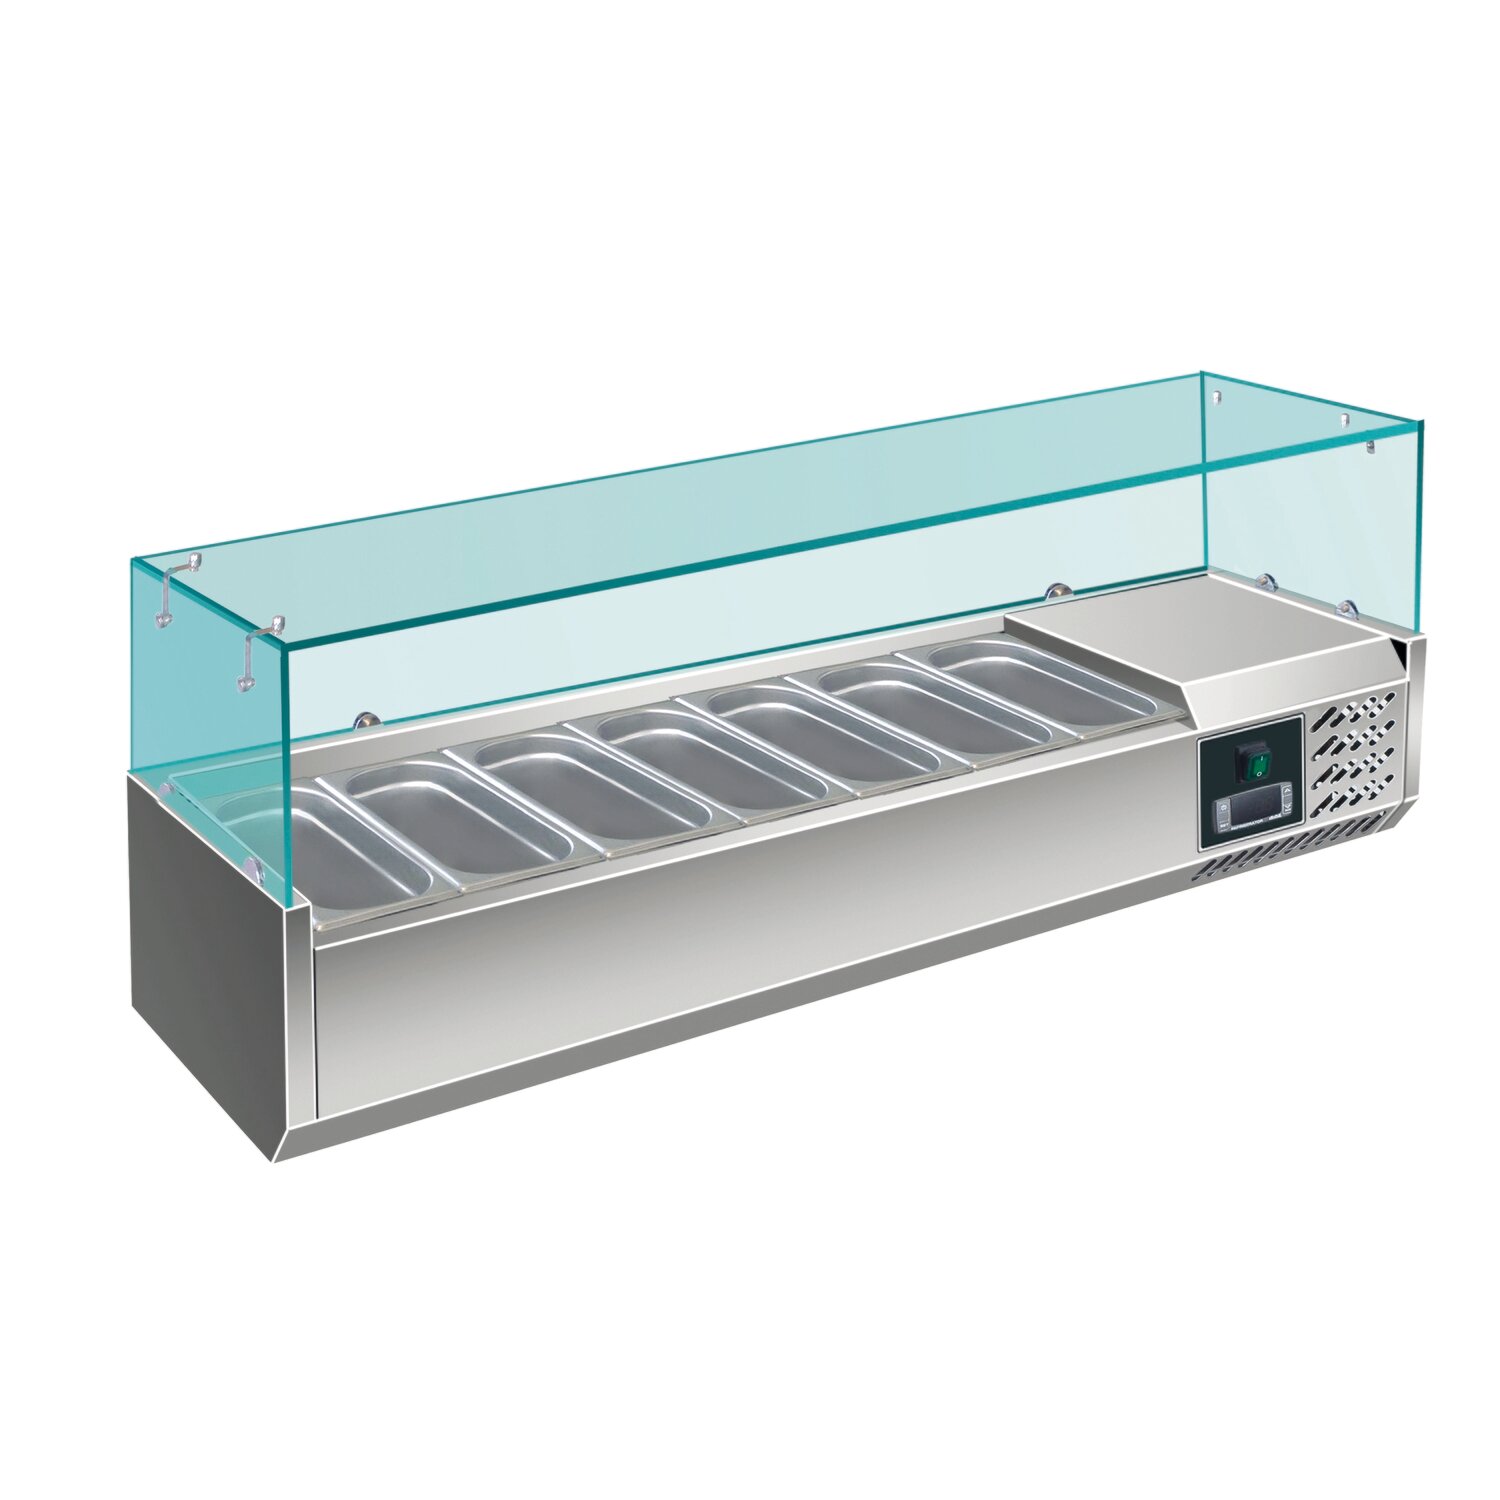 SARO Refrigerated Table Top Display modell EVRX 1500/330